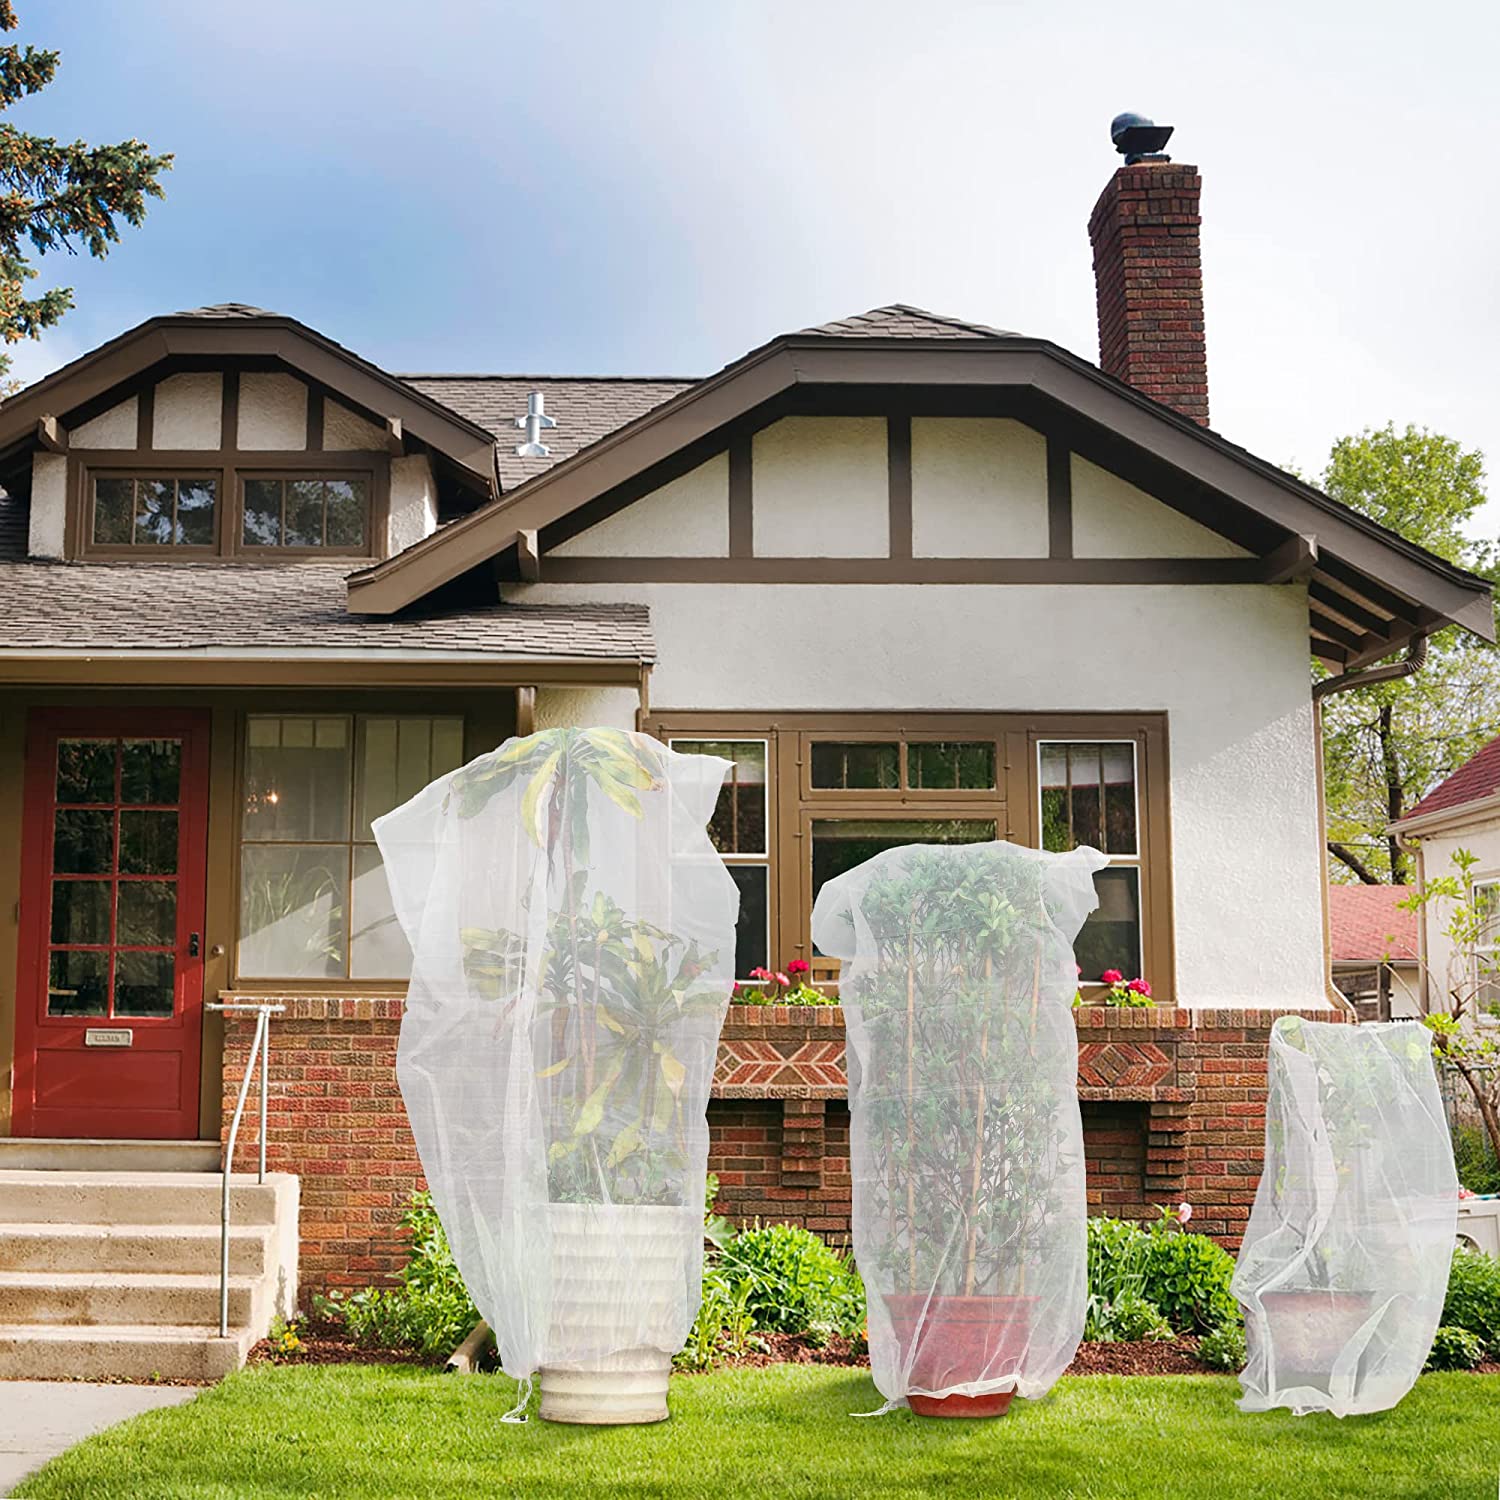 Amazon 14 ways to weather proof your garden vertical plant bags for protection